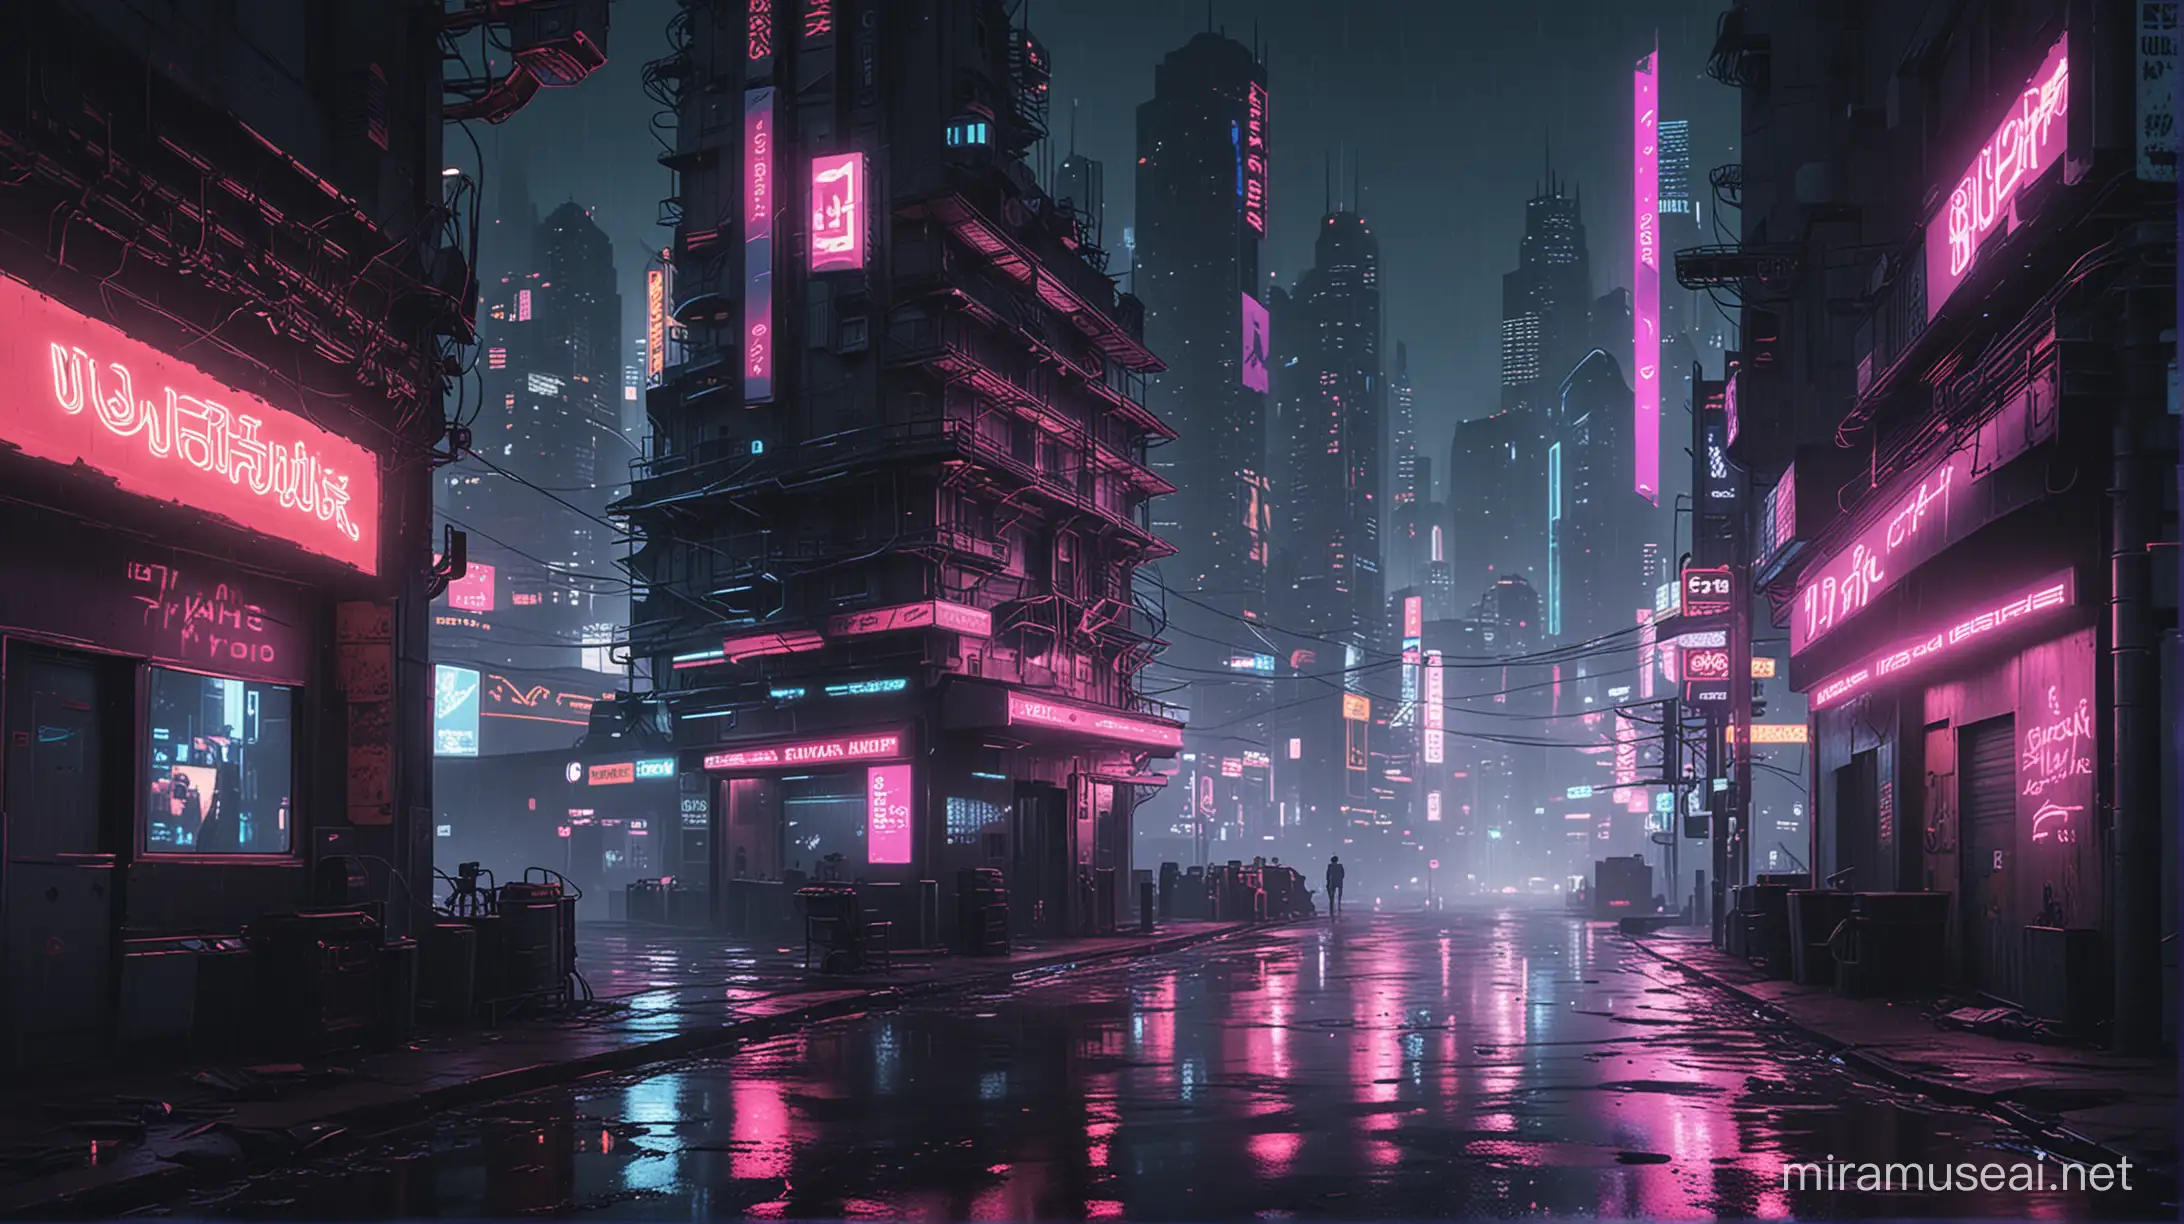 Vibrant Cyberpunk Cityscape with Neon Lights at Night